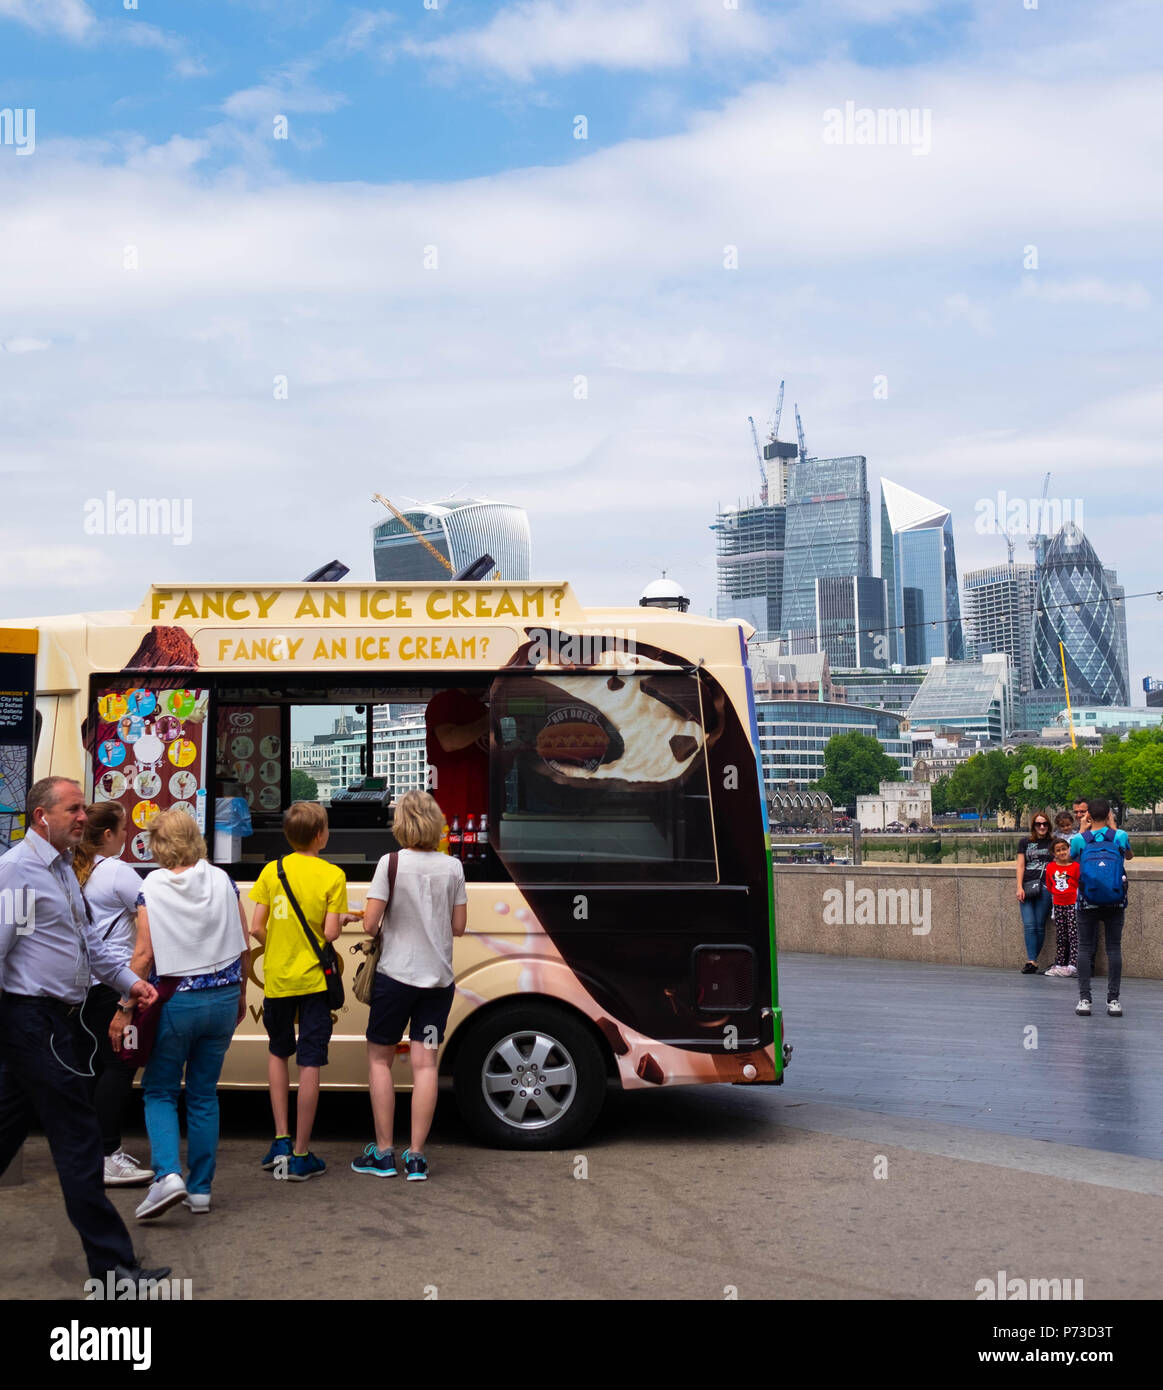 London, England. 4th July 2018. Ice cream on sale near London's Tower Bridge on another very hot day. The present heatwave is set to continue. ©Tim Ring/Alamy Live News Stock Photo